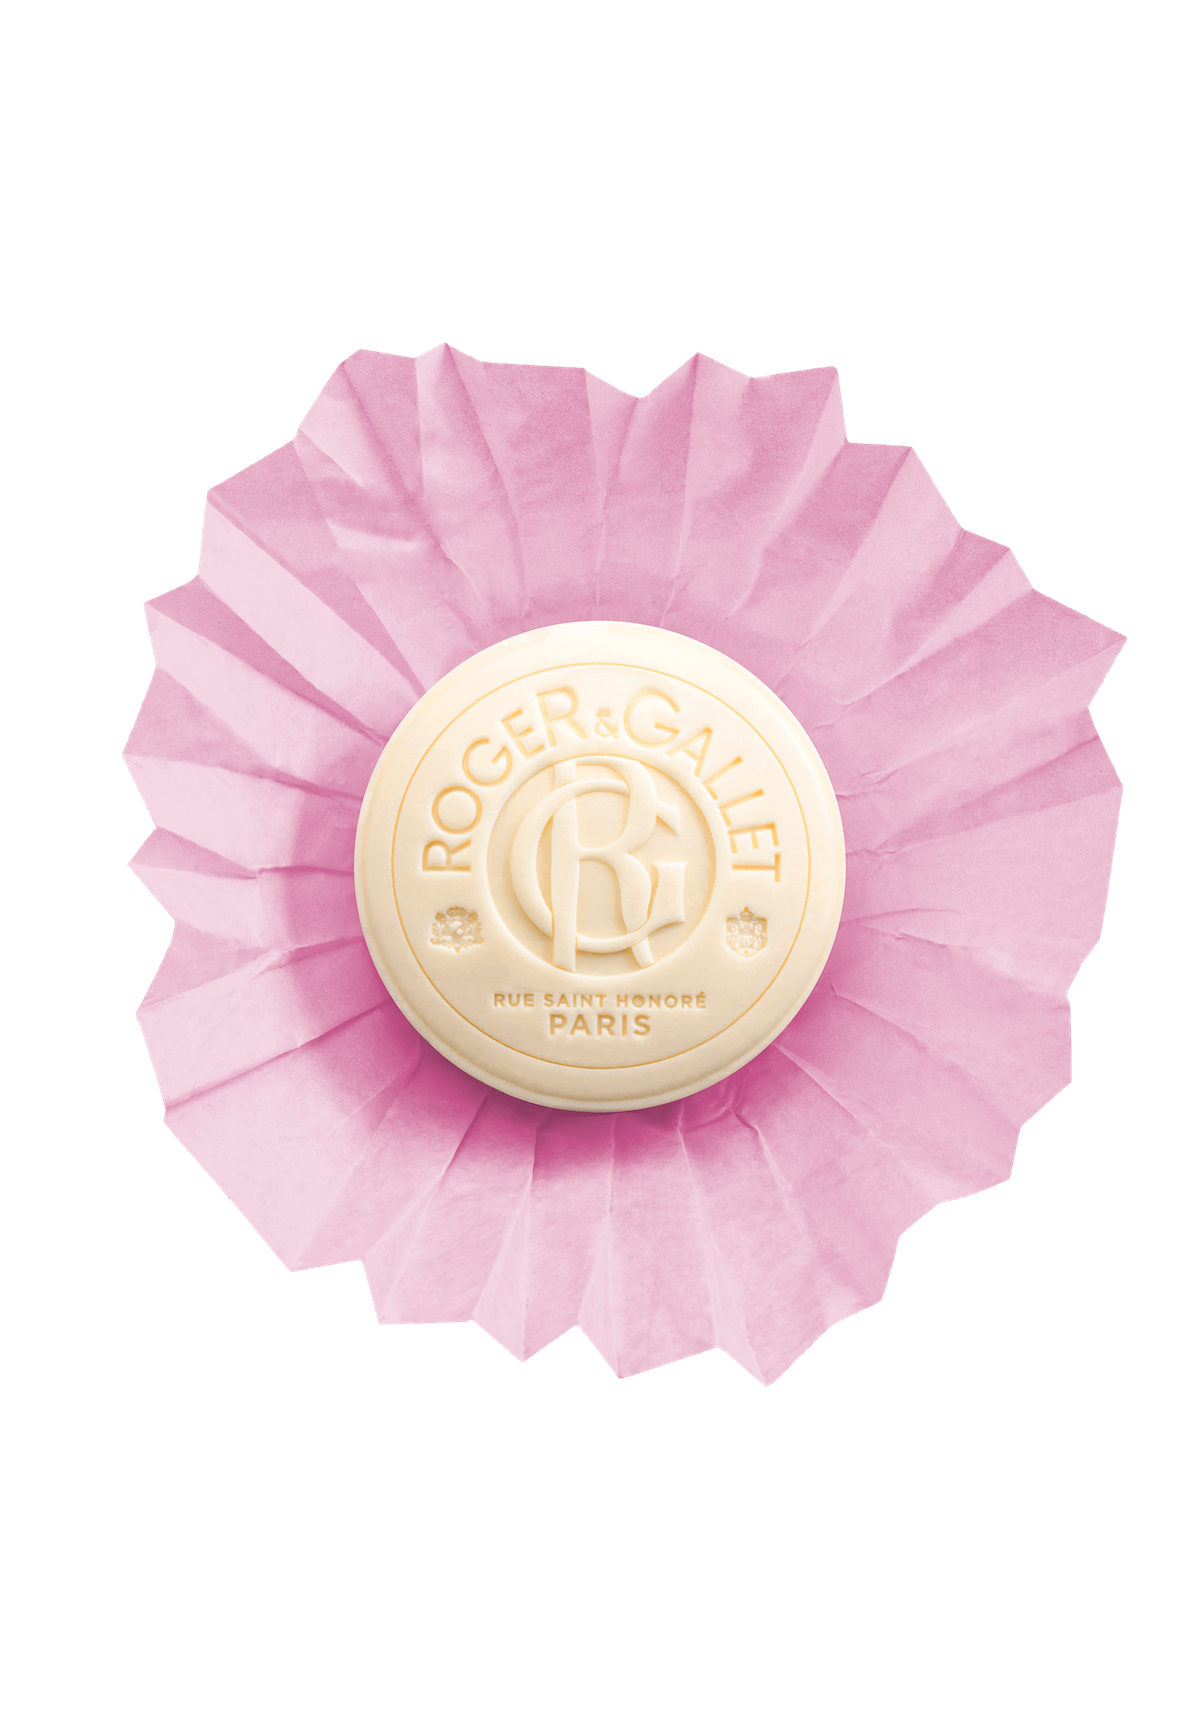 A pink, round Roger & Gallet Tea Leaf wellbeing soap labeled "roger & gallet - paris" in French, sealed with a black and white emblem, surrounded by a diagonal striped green and white border.